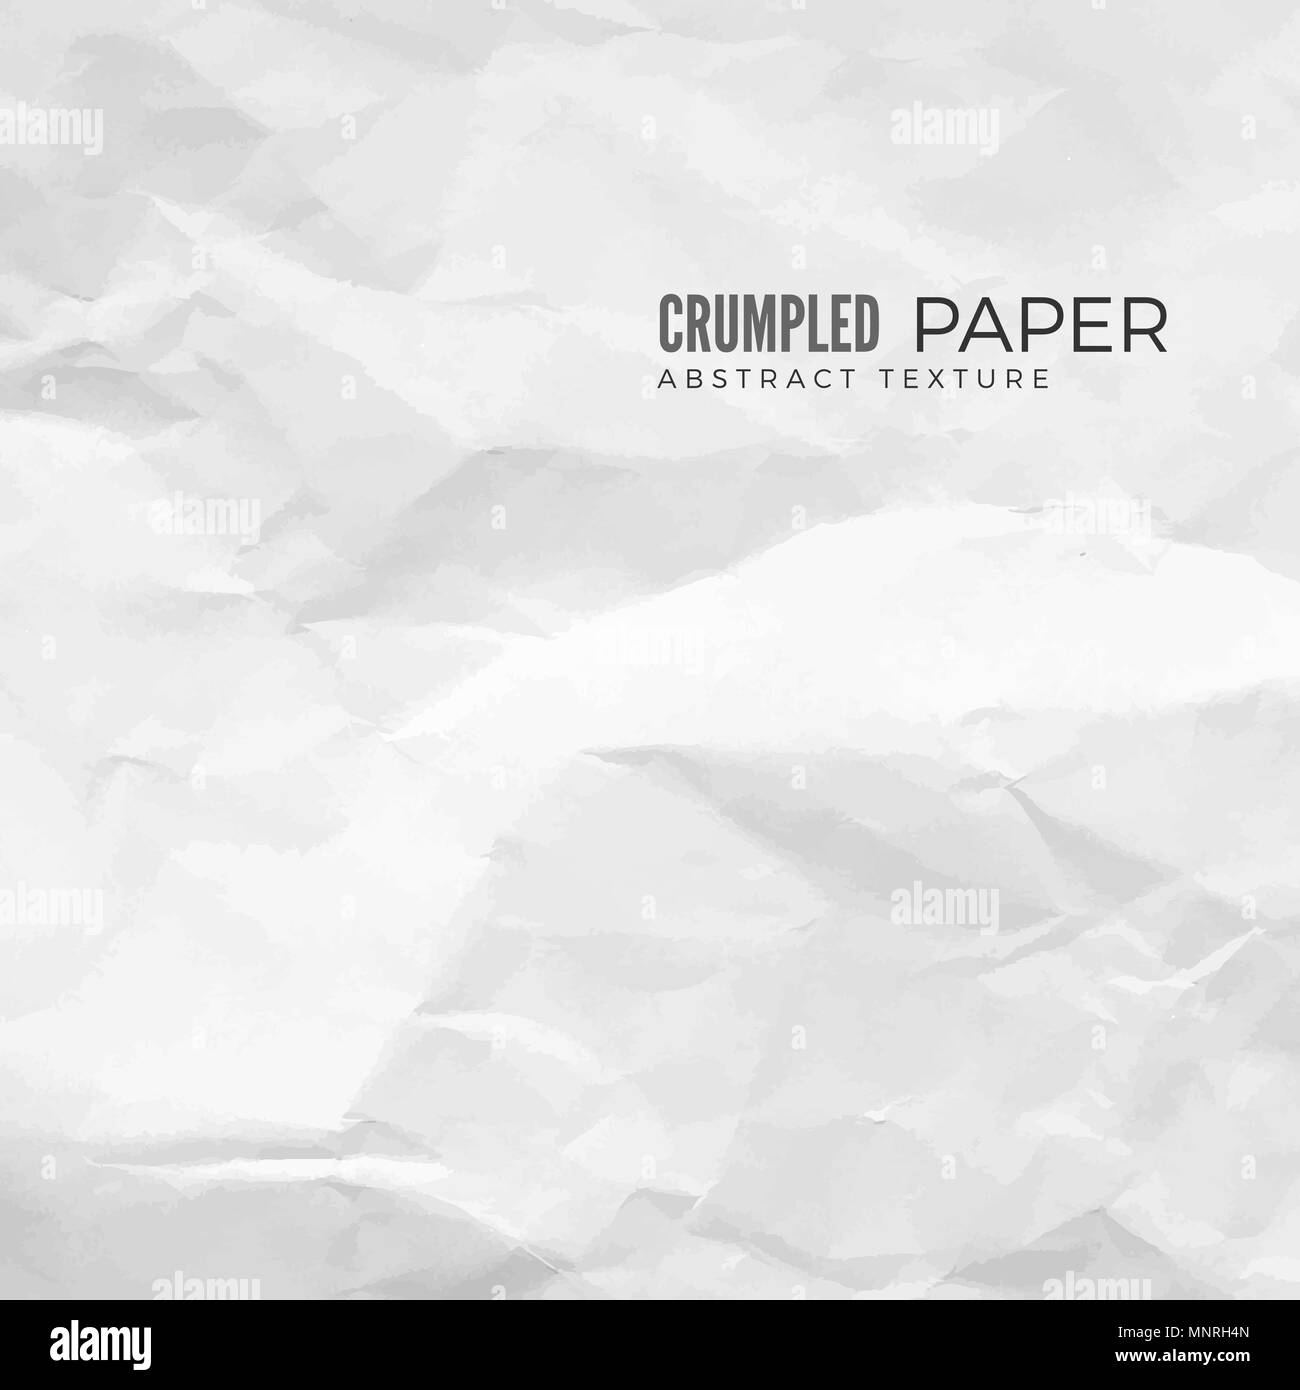 Crumpled Paper Texture. White empty leaf of crumpled paper. Torn surface of letter blank. Effect Crumpled paper sheet background for your design. Vect Stock Vector